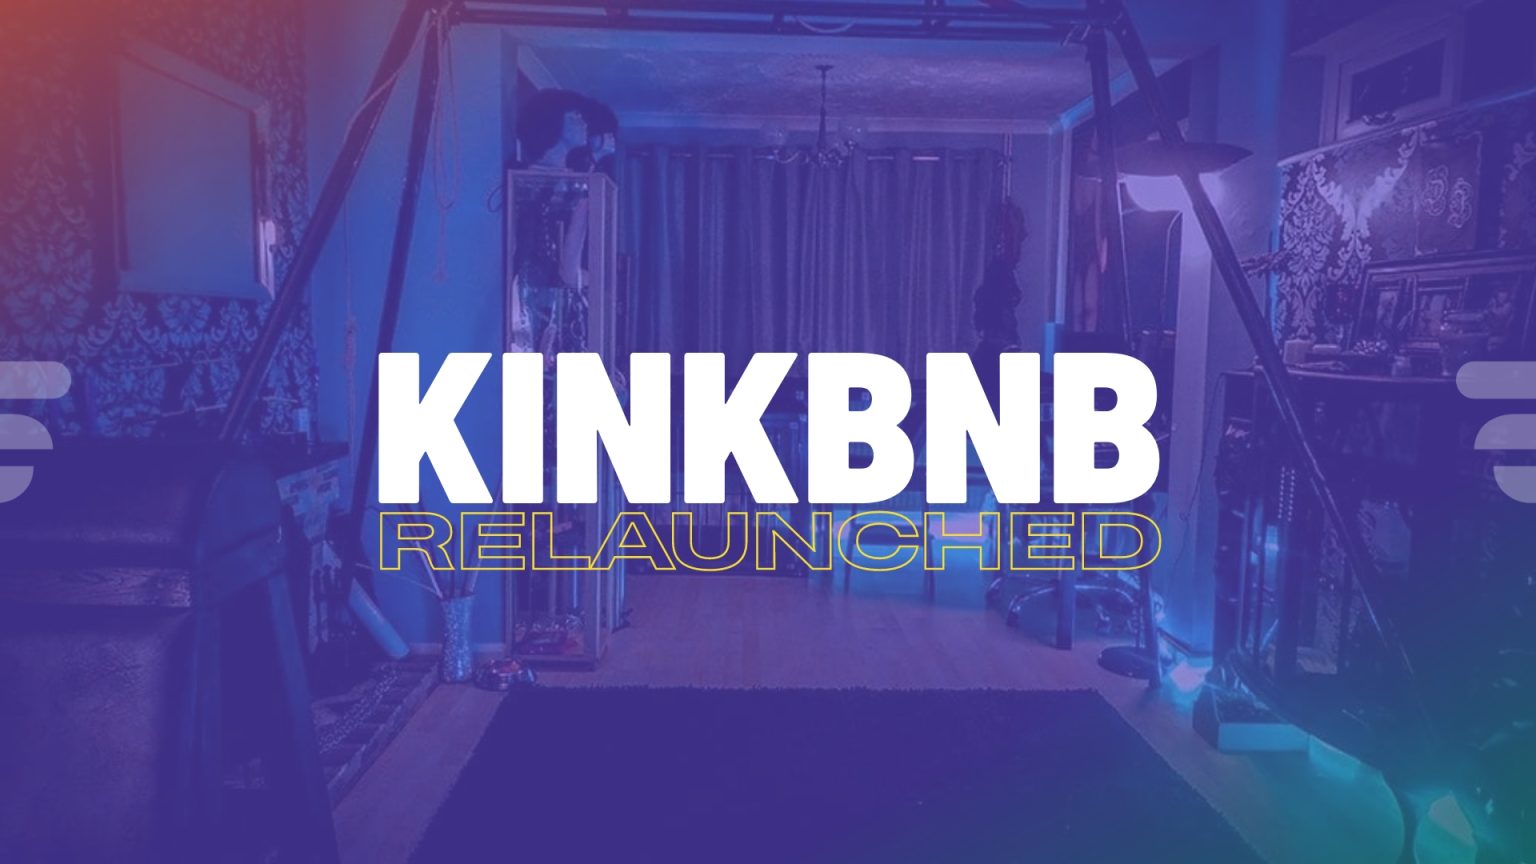 Airbnb For Sex Dungeons Kinkbnb Finally Relaunched 3753